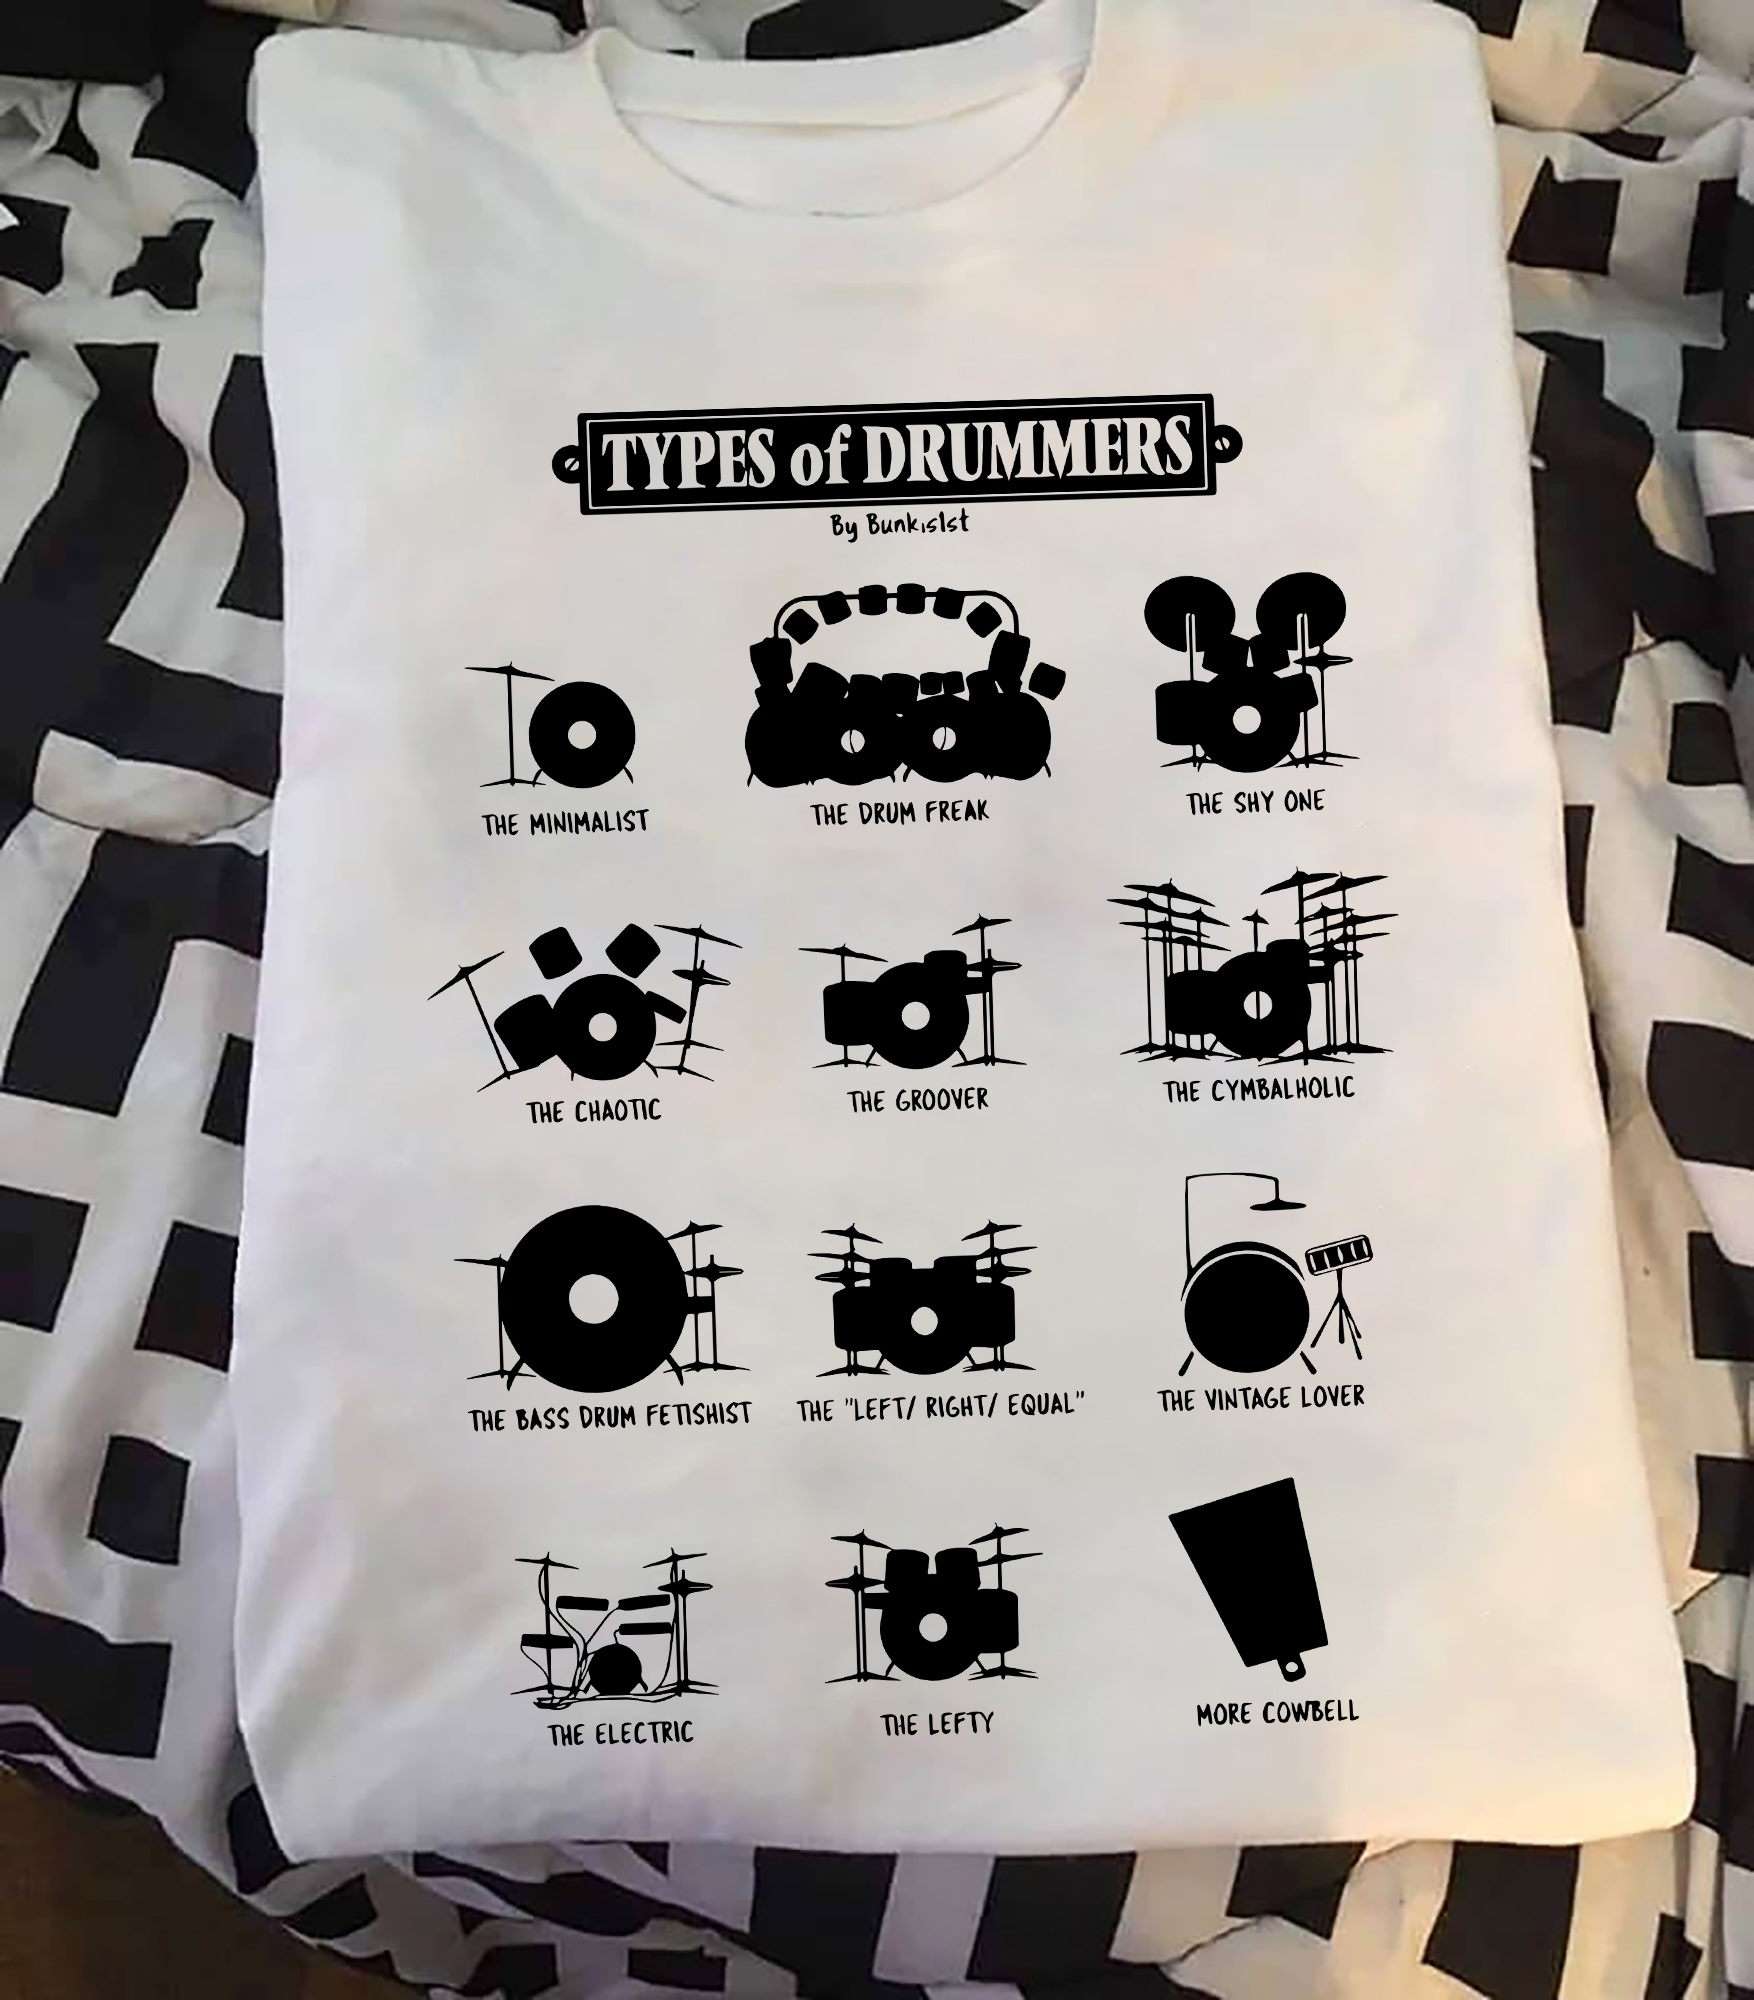 Types of Drummers - The minimalist, the drum freak, the shy one, the groover, the cymbalholic